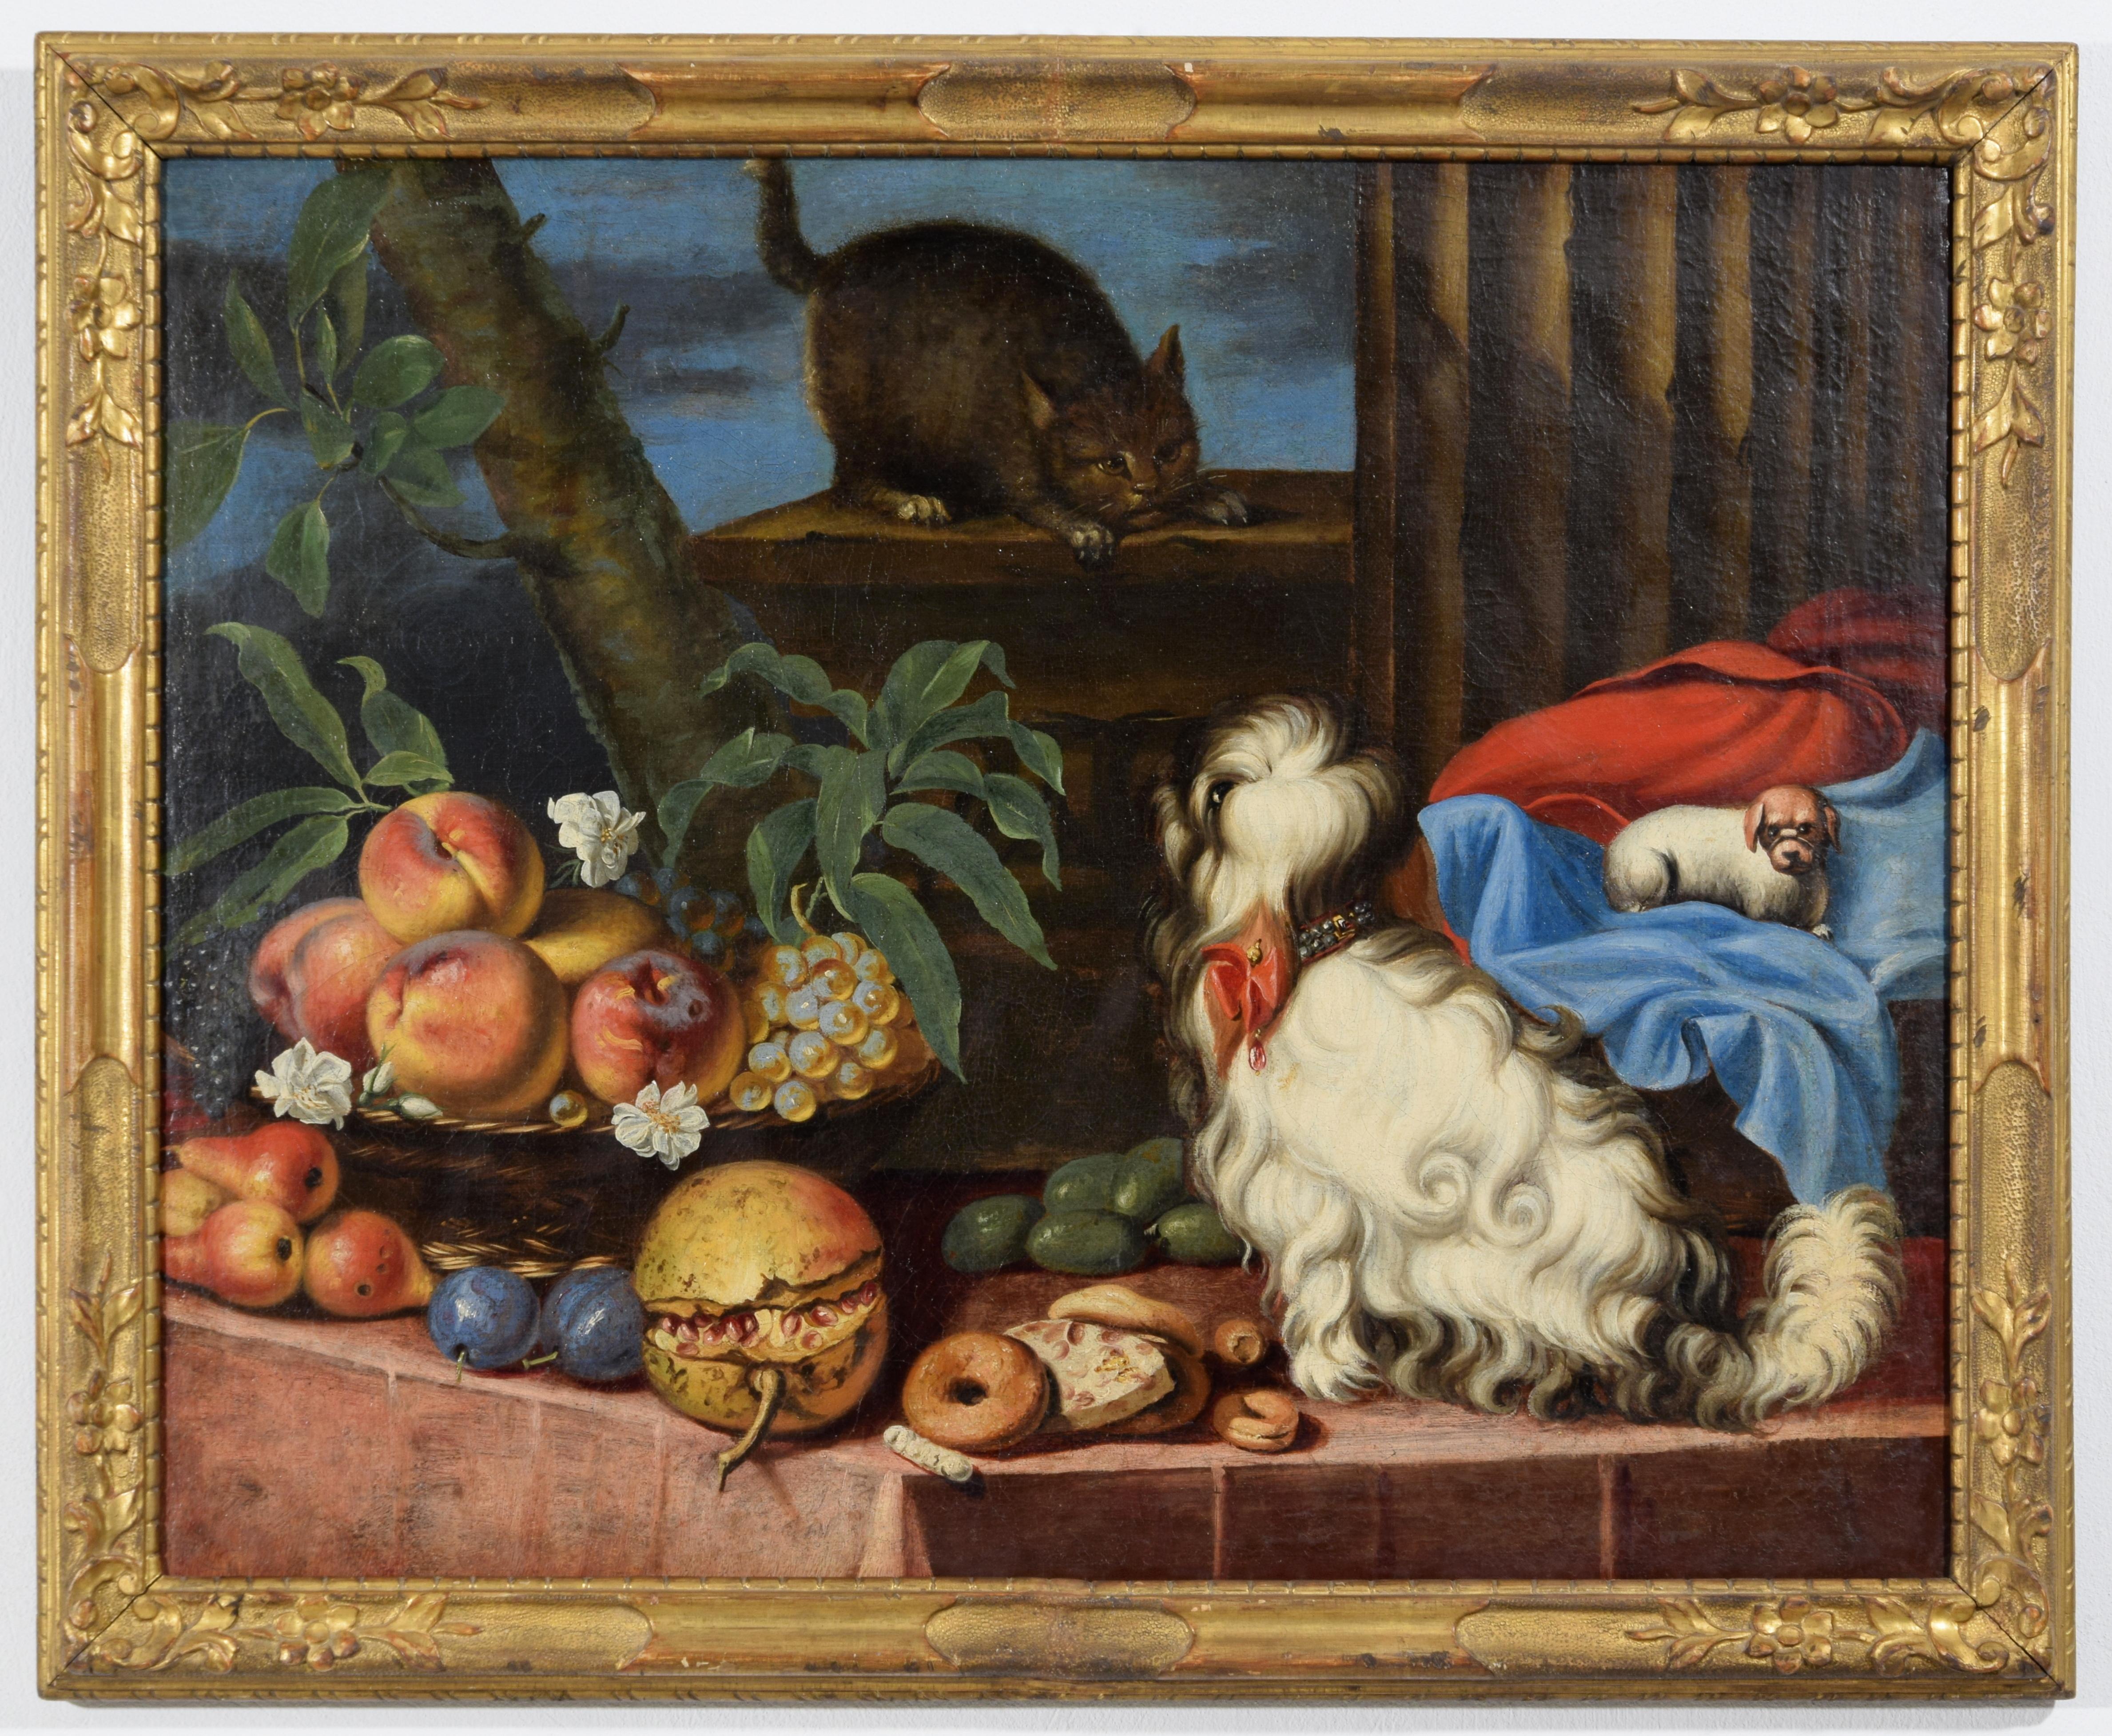 17th Century, Italian painting with still life with fruit, dogs and cat
Measurements: With frame cm W 93 x H 75.5 x D 4; Frame cm W 82.5 x H 66.5

The painting, made in oil on canvas, is stylistically attributable to a painter active in Italy in